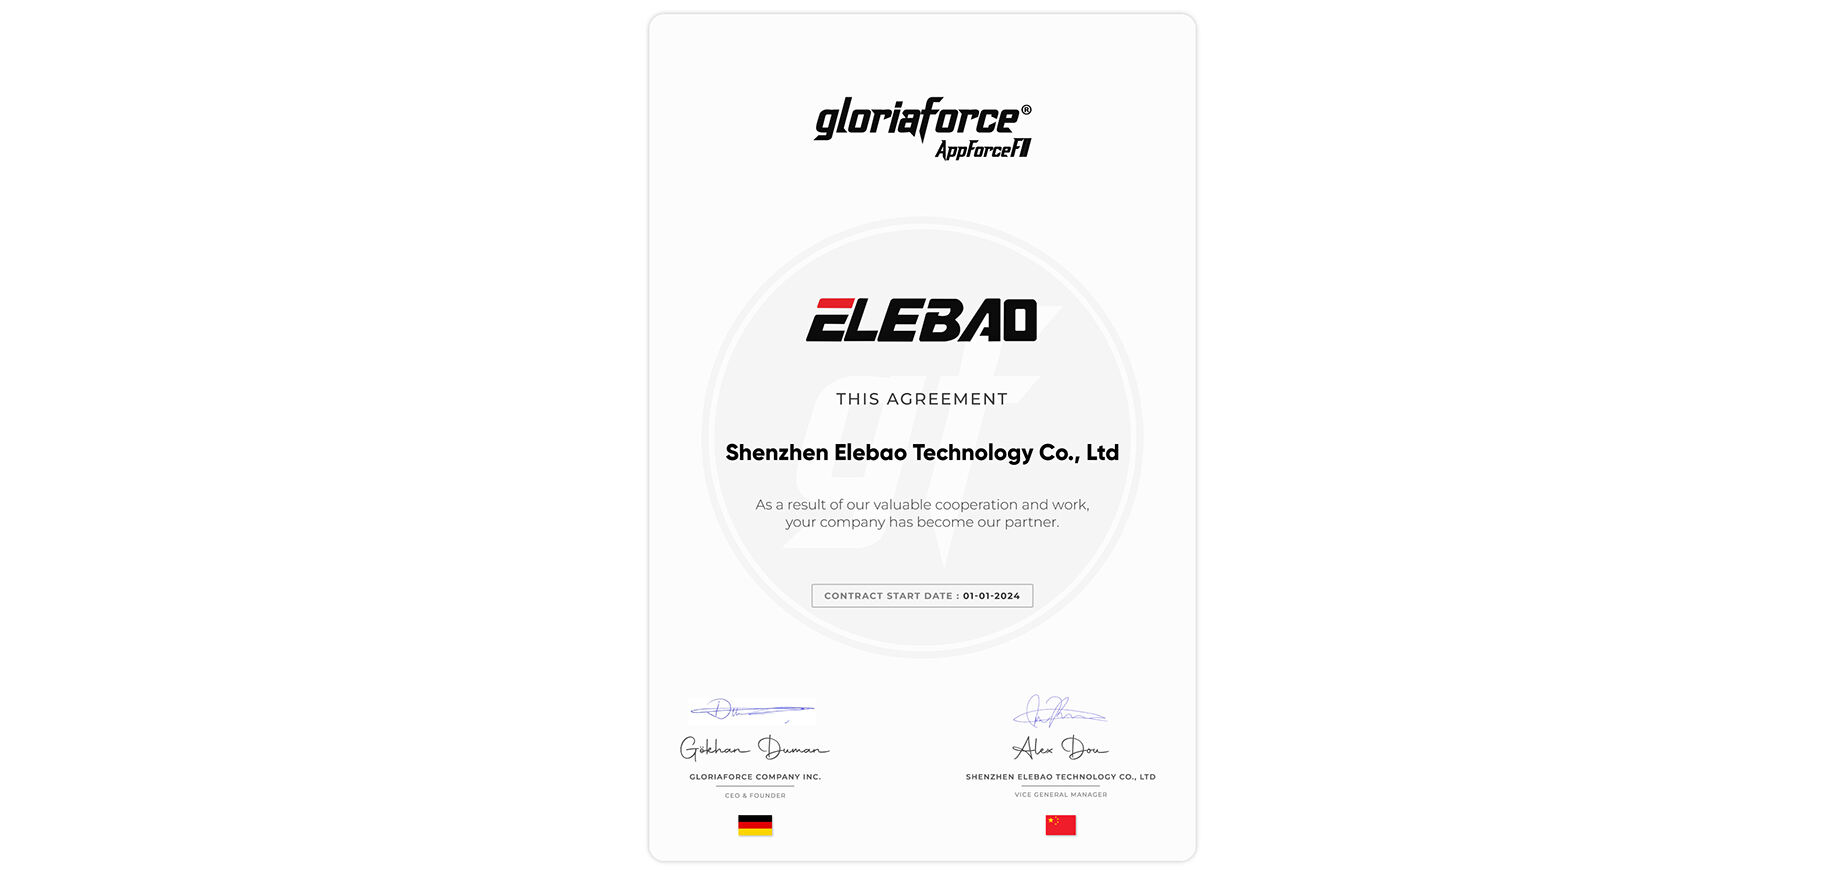 Groundbreaking Collaboration: GloriaForce and Elebao Unite for Technological Advancements in Broadcasting and Media